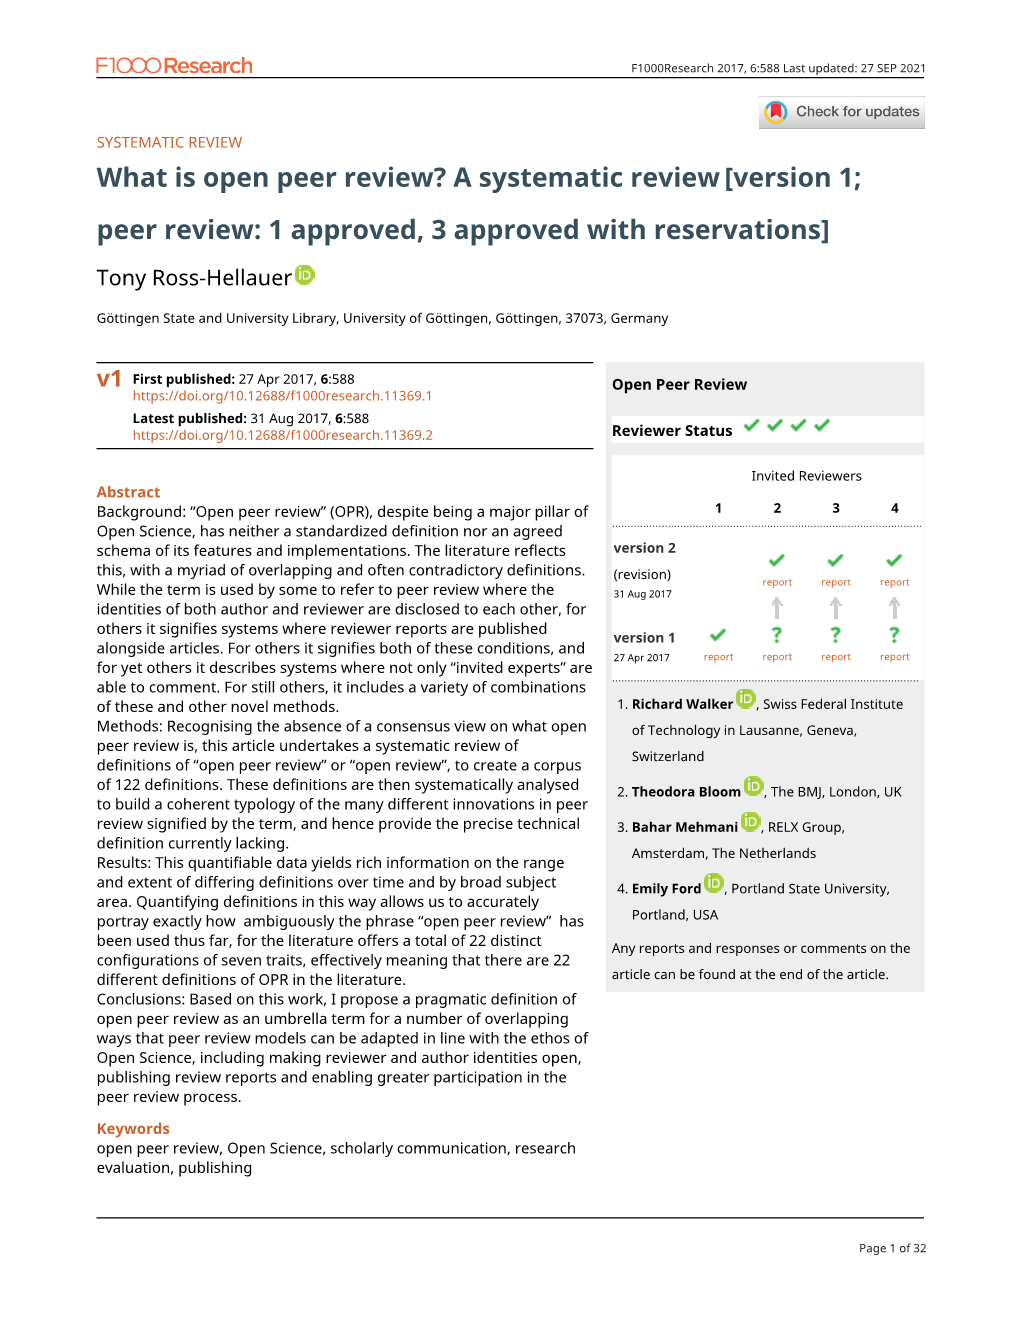 What Is Open Peer Review? a Systematic Review [Version 1; Peer Review: 1 Approved, 3 Approved with Reservations]